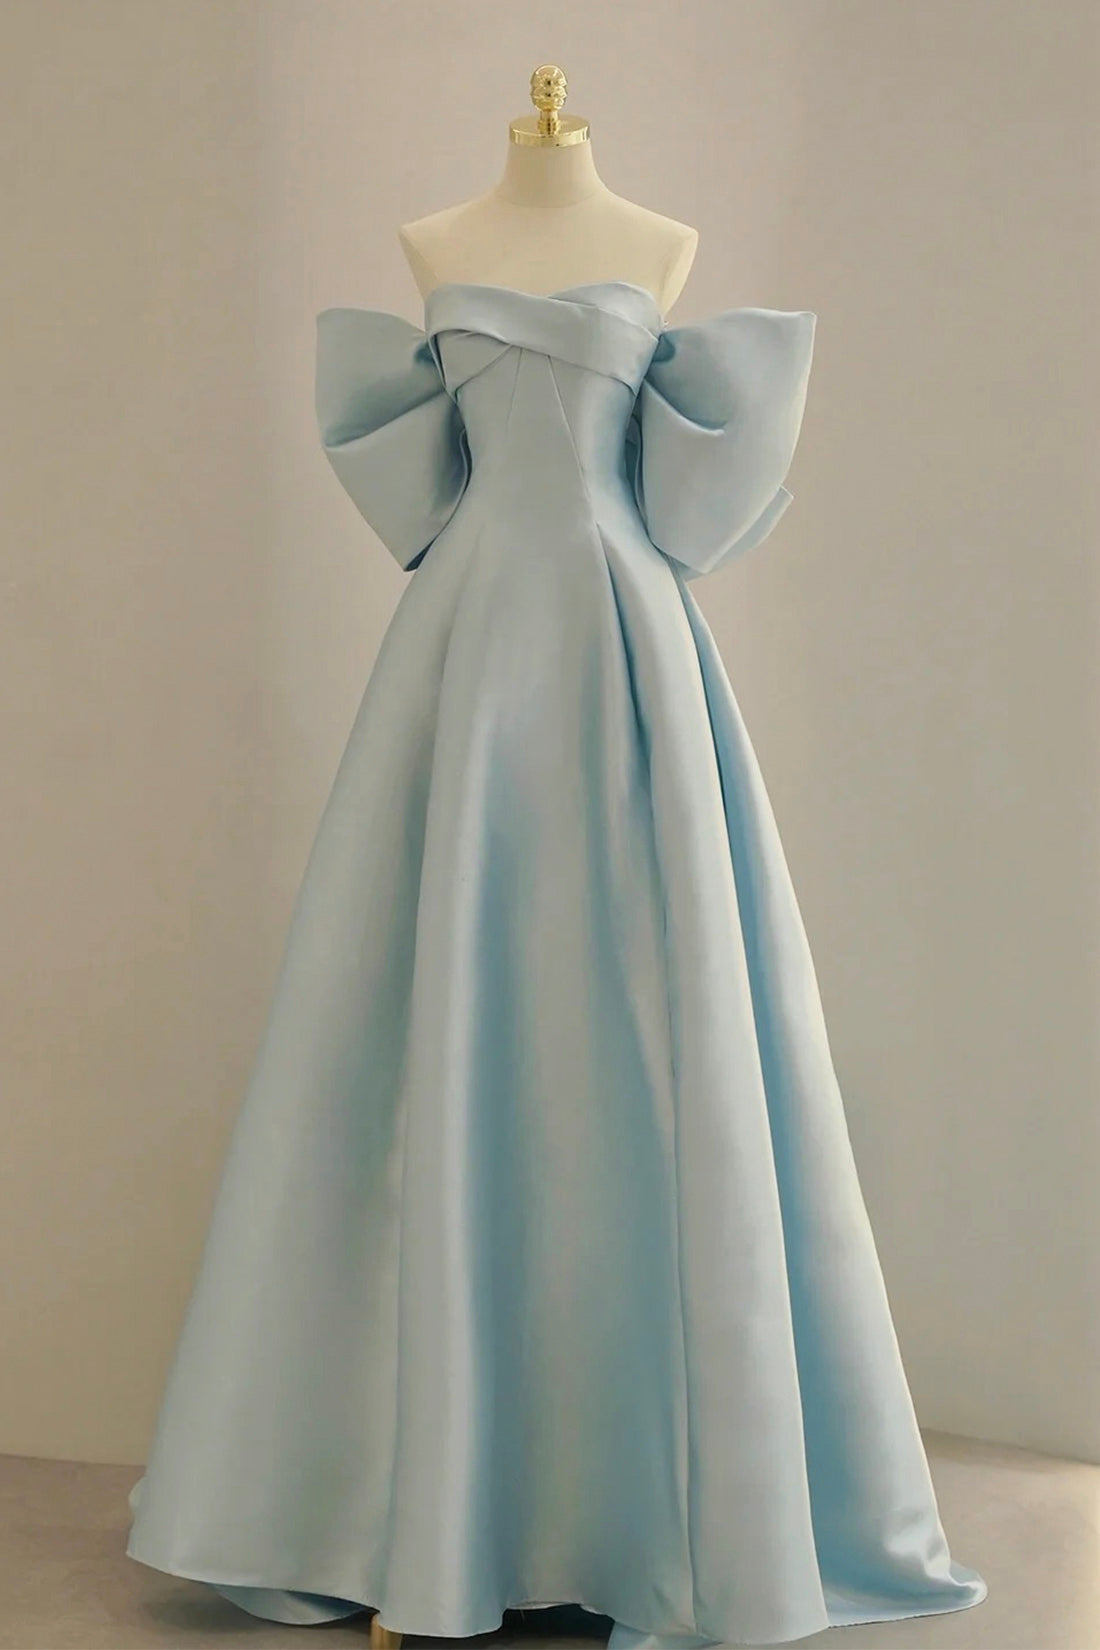 Blue Satin Long Prom Dress Outfits For Women with Big Bow, Blue A-Line Evening Party Dress